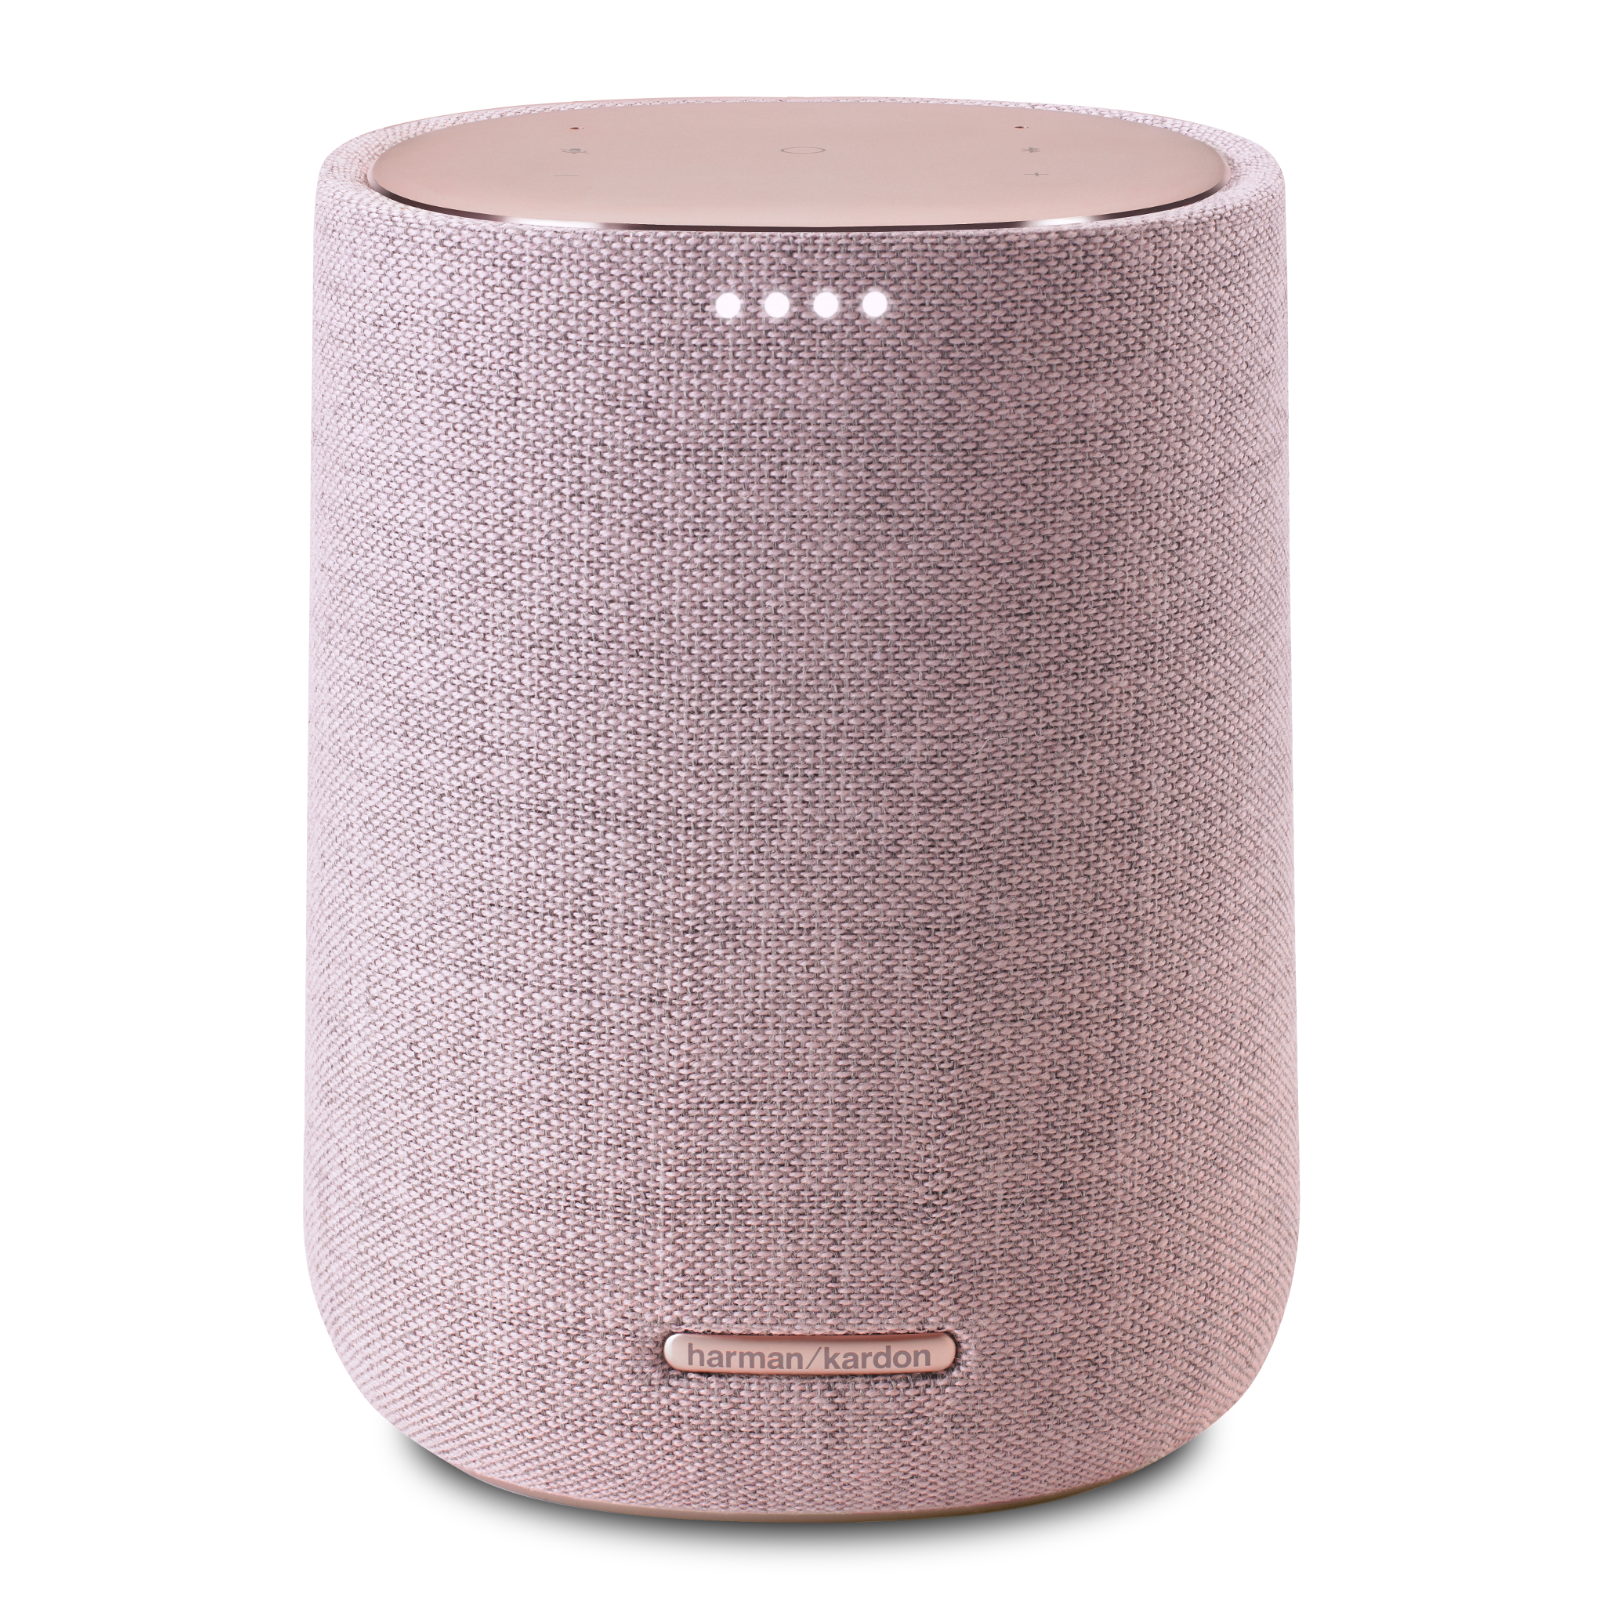 Harman Kardon Citation One MKII - Pink - All-in-one smart speaker with room-filling sound - Hero